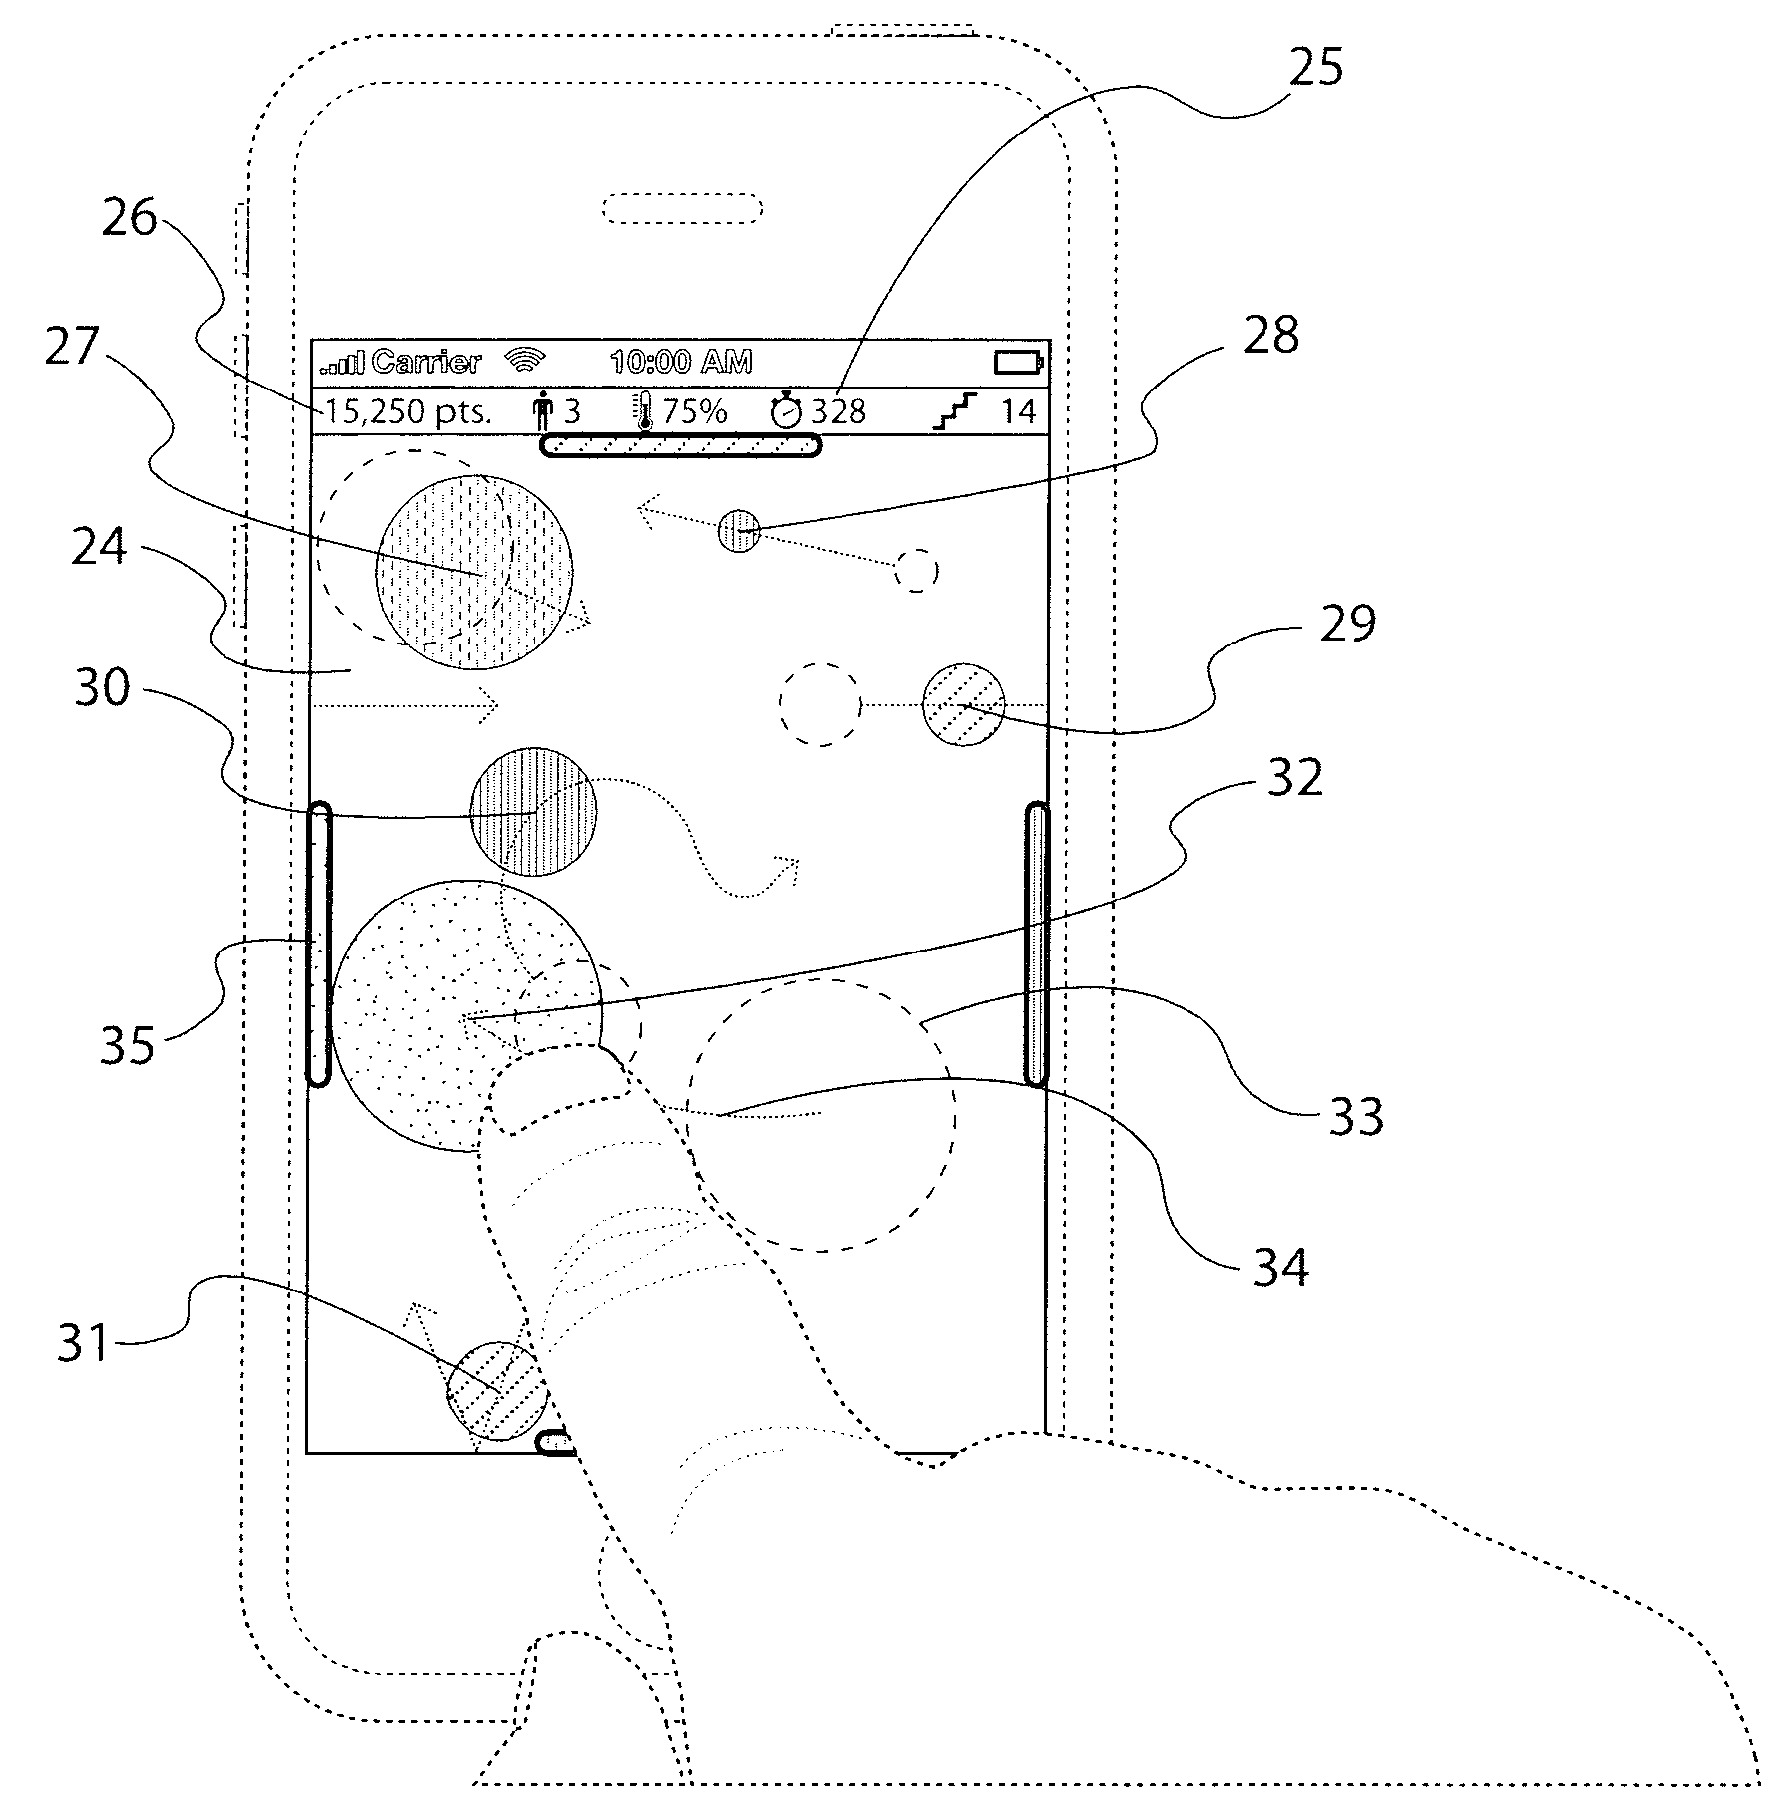 Electronic game and method